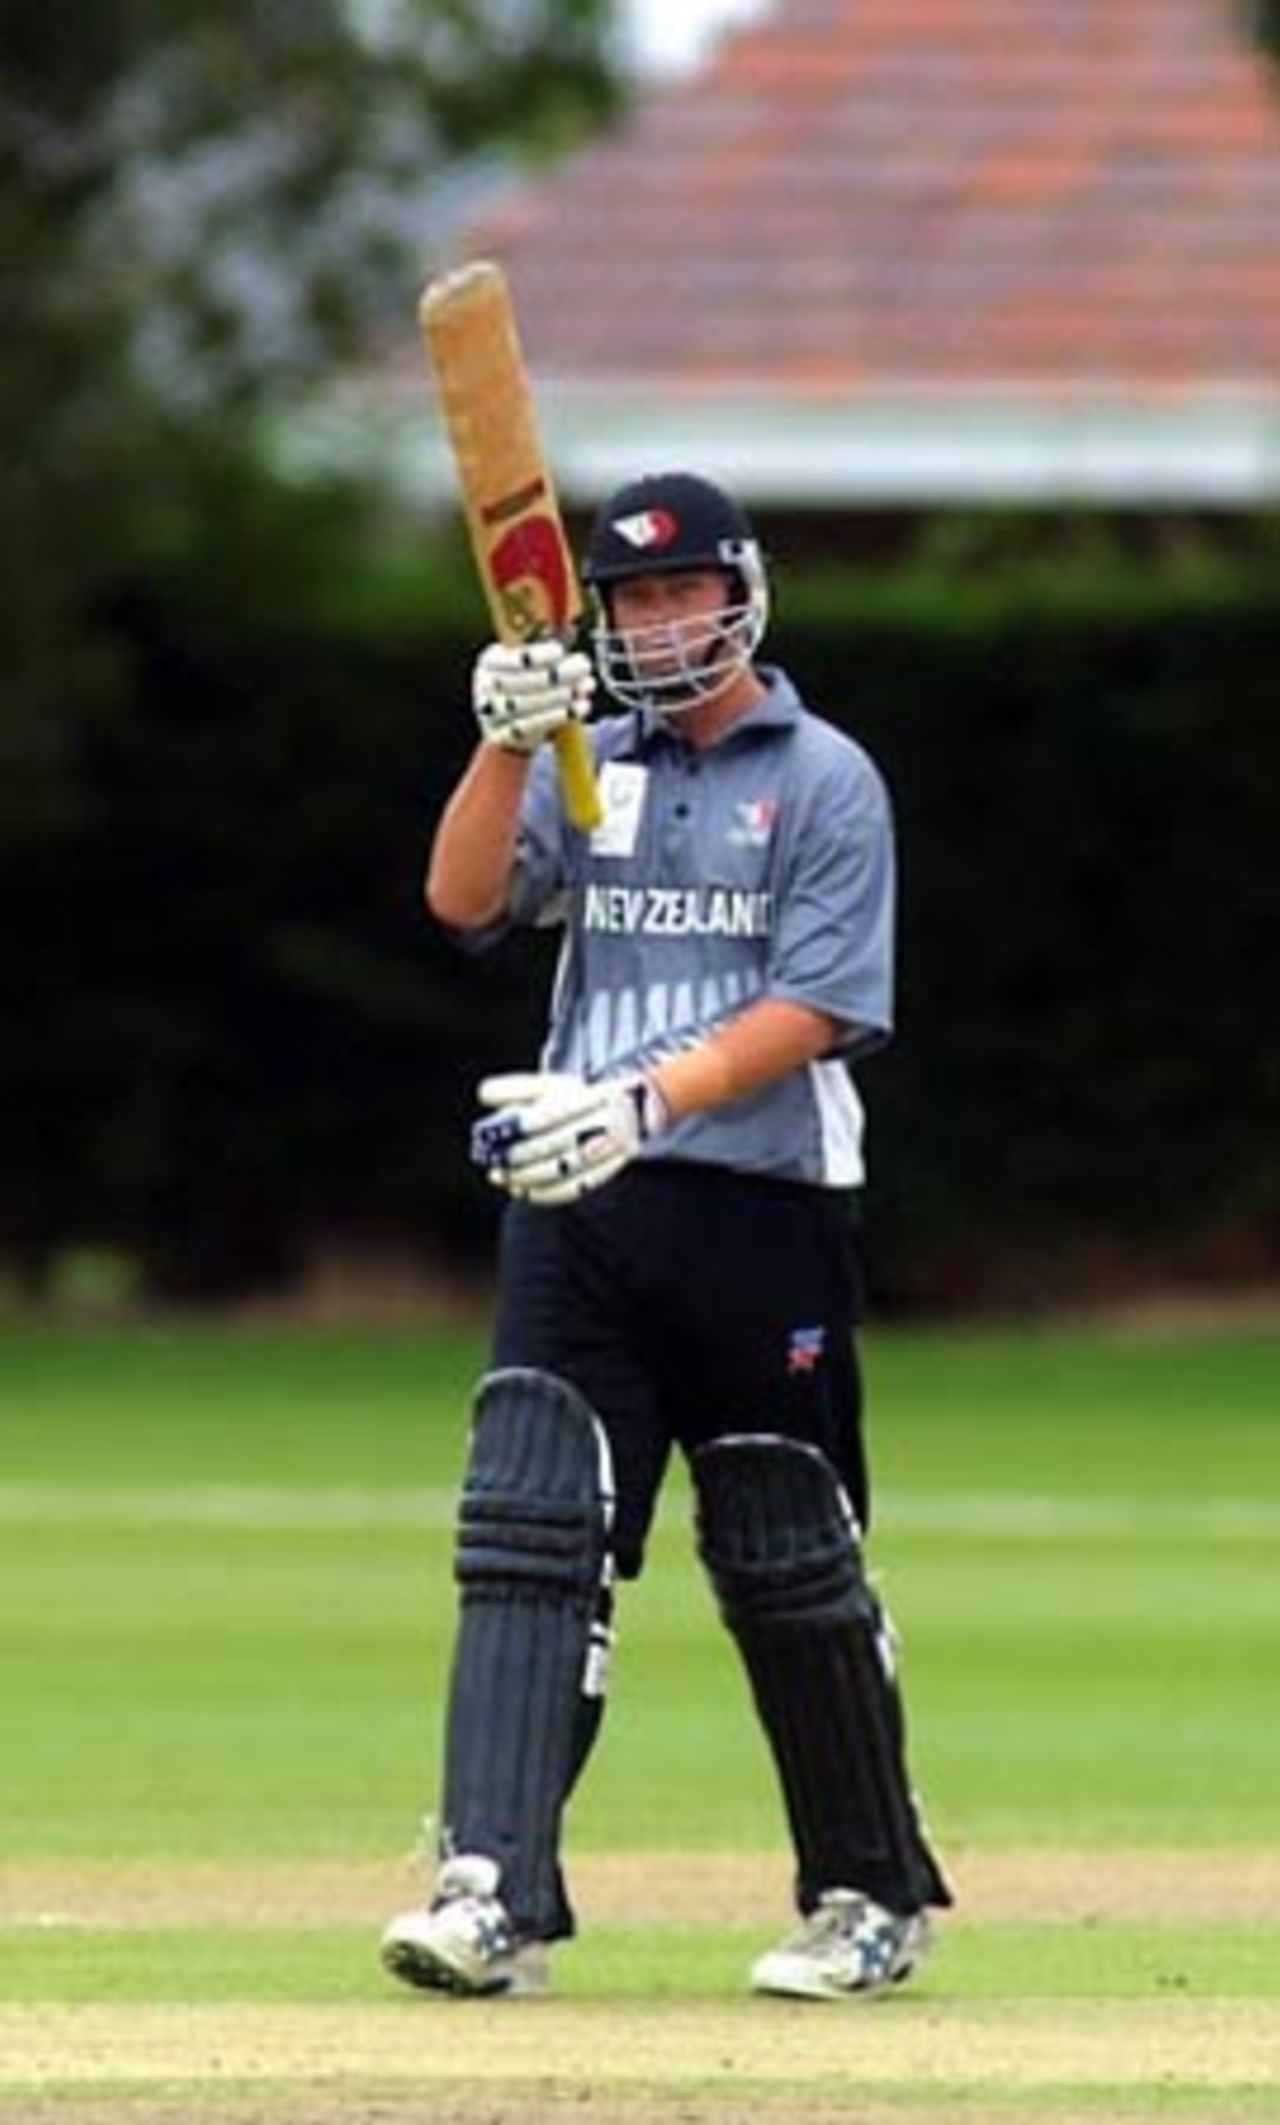 New Zealand Under-19 batsman Jesse Ryder raises his bat in celebration of reaching his fifty. He went on to score 54. ICC Under-19 World Cup Super League Group 2: England Under-19s v New Zealand Under-19s at Lincoln No. 3, Lincoln, 28 January 2002.